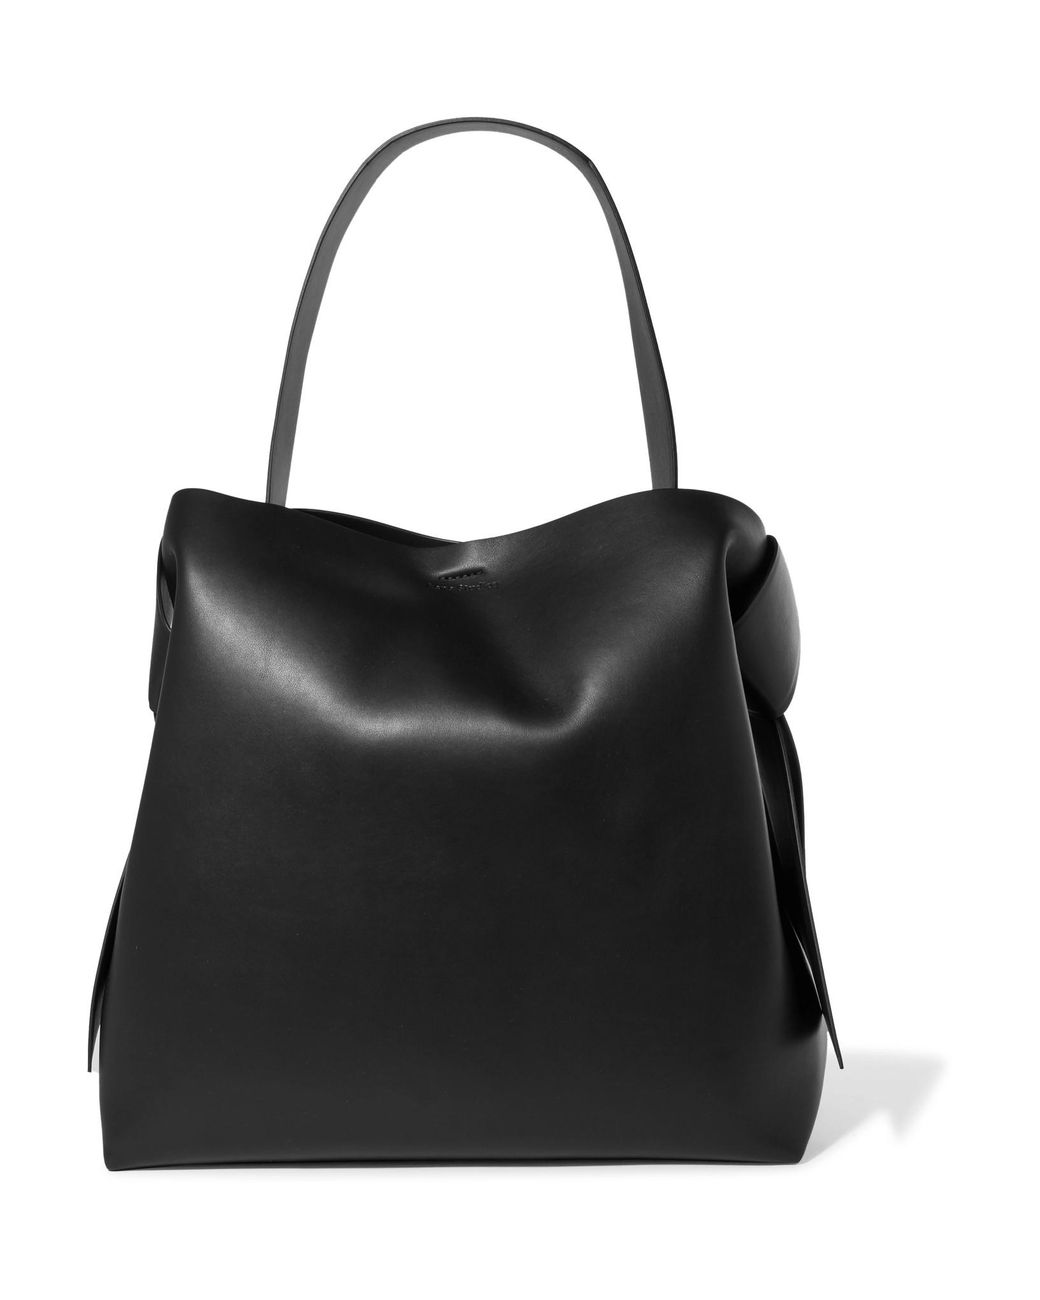 Acne Studios Musubi Maxi Knotted Leather Shoulder Bag in Black | Lyst ...